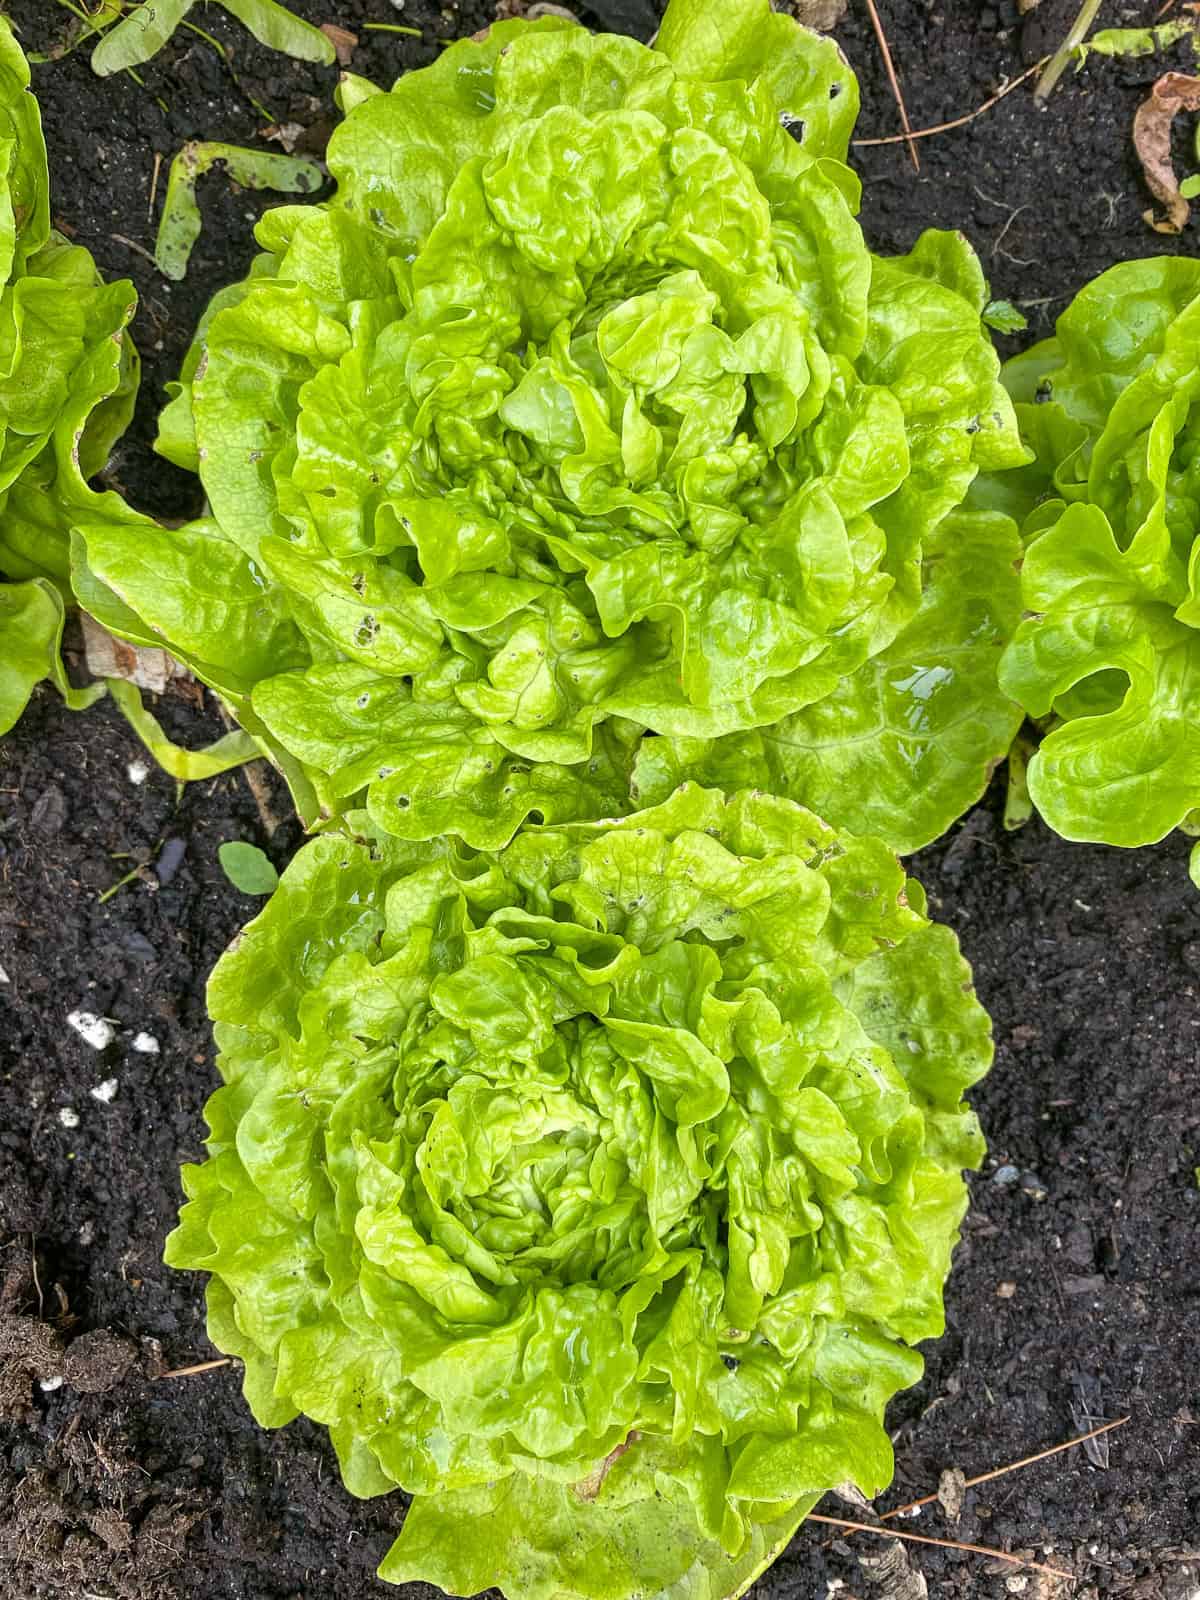 An image of two heads of tom thumb lettuce in a backyard garden.